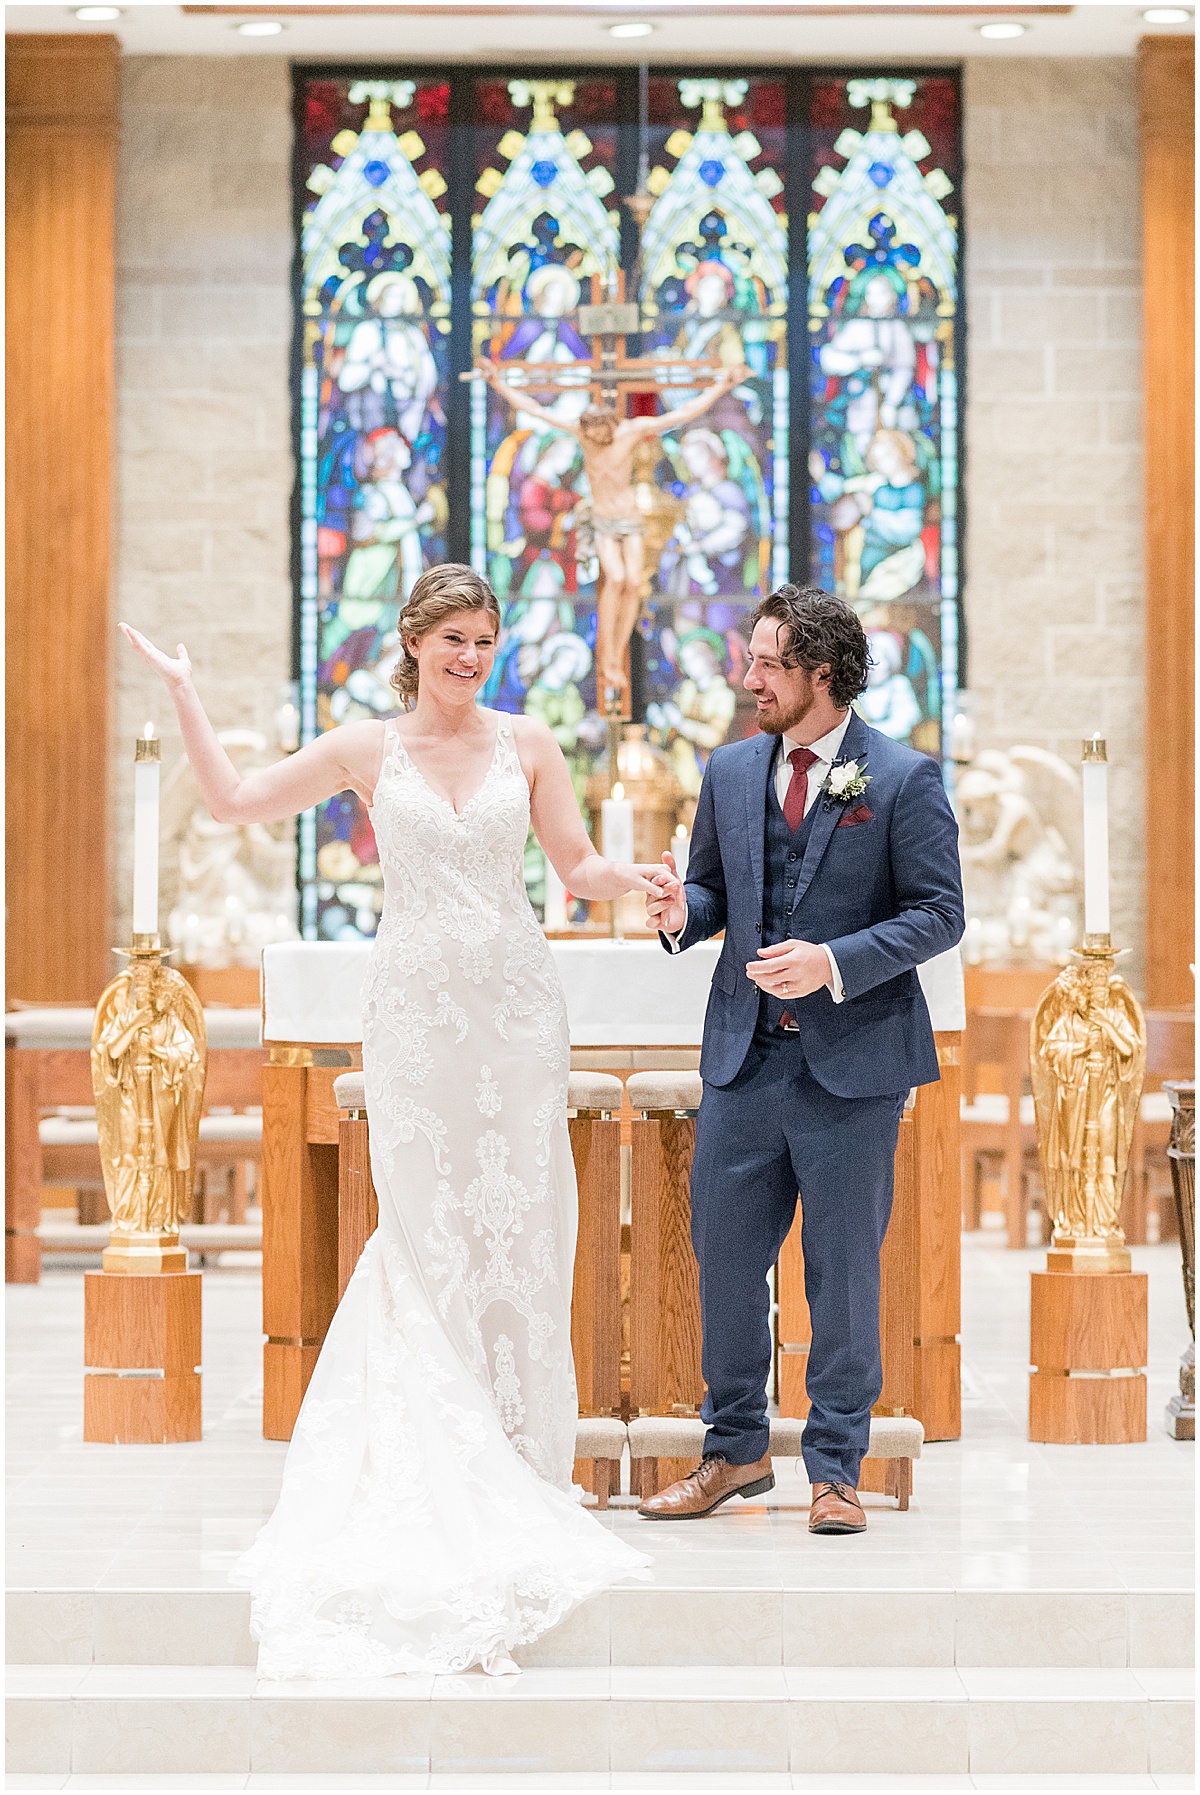 Wedding Ceremony at Our Lady of Mercy Catholic Church in Naperville, Illinois